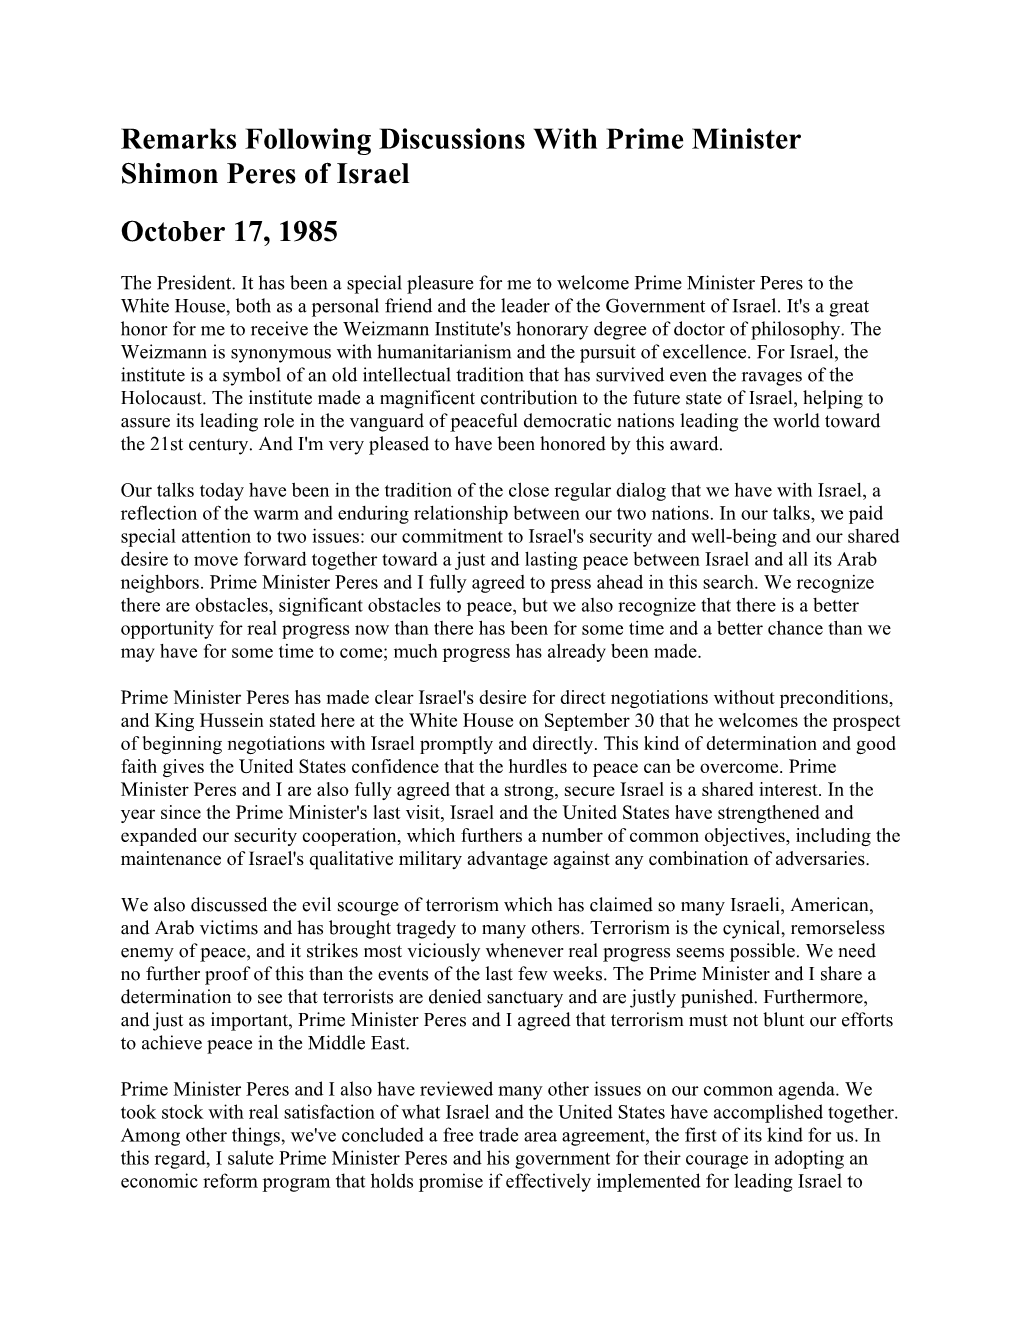 Remarks Following Discussions with Prime Minister Shimon Peres of Israel October 17, 1985